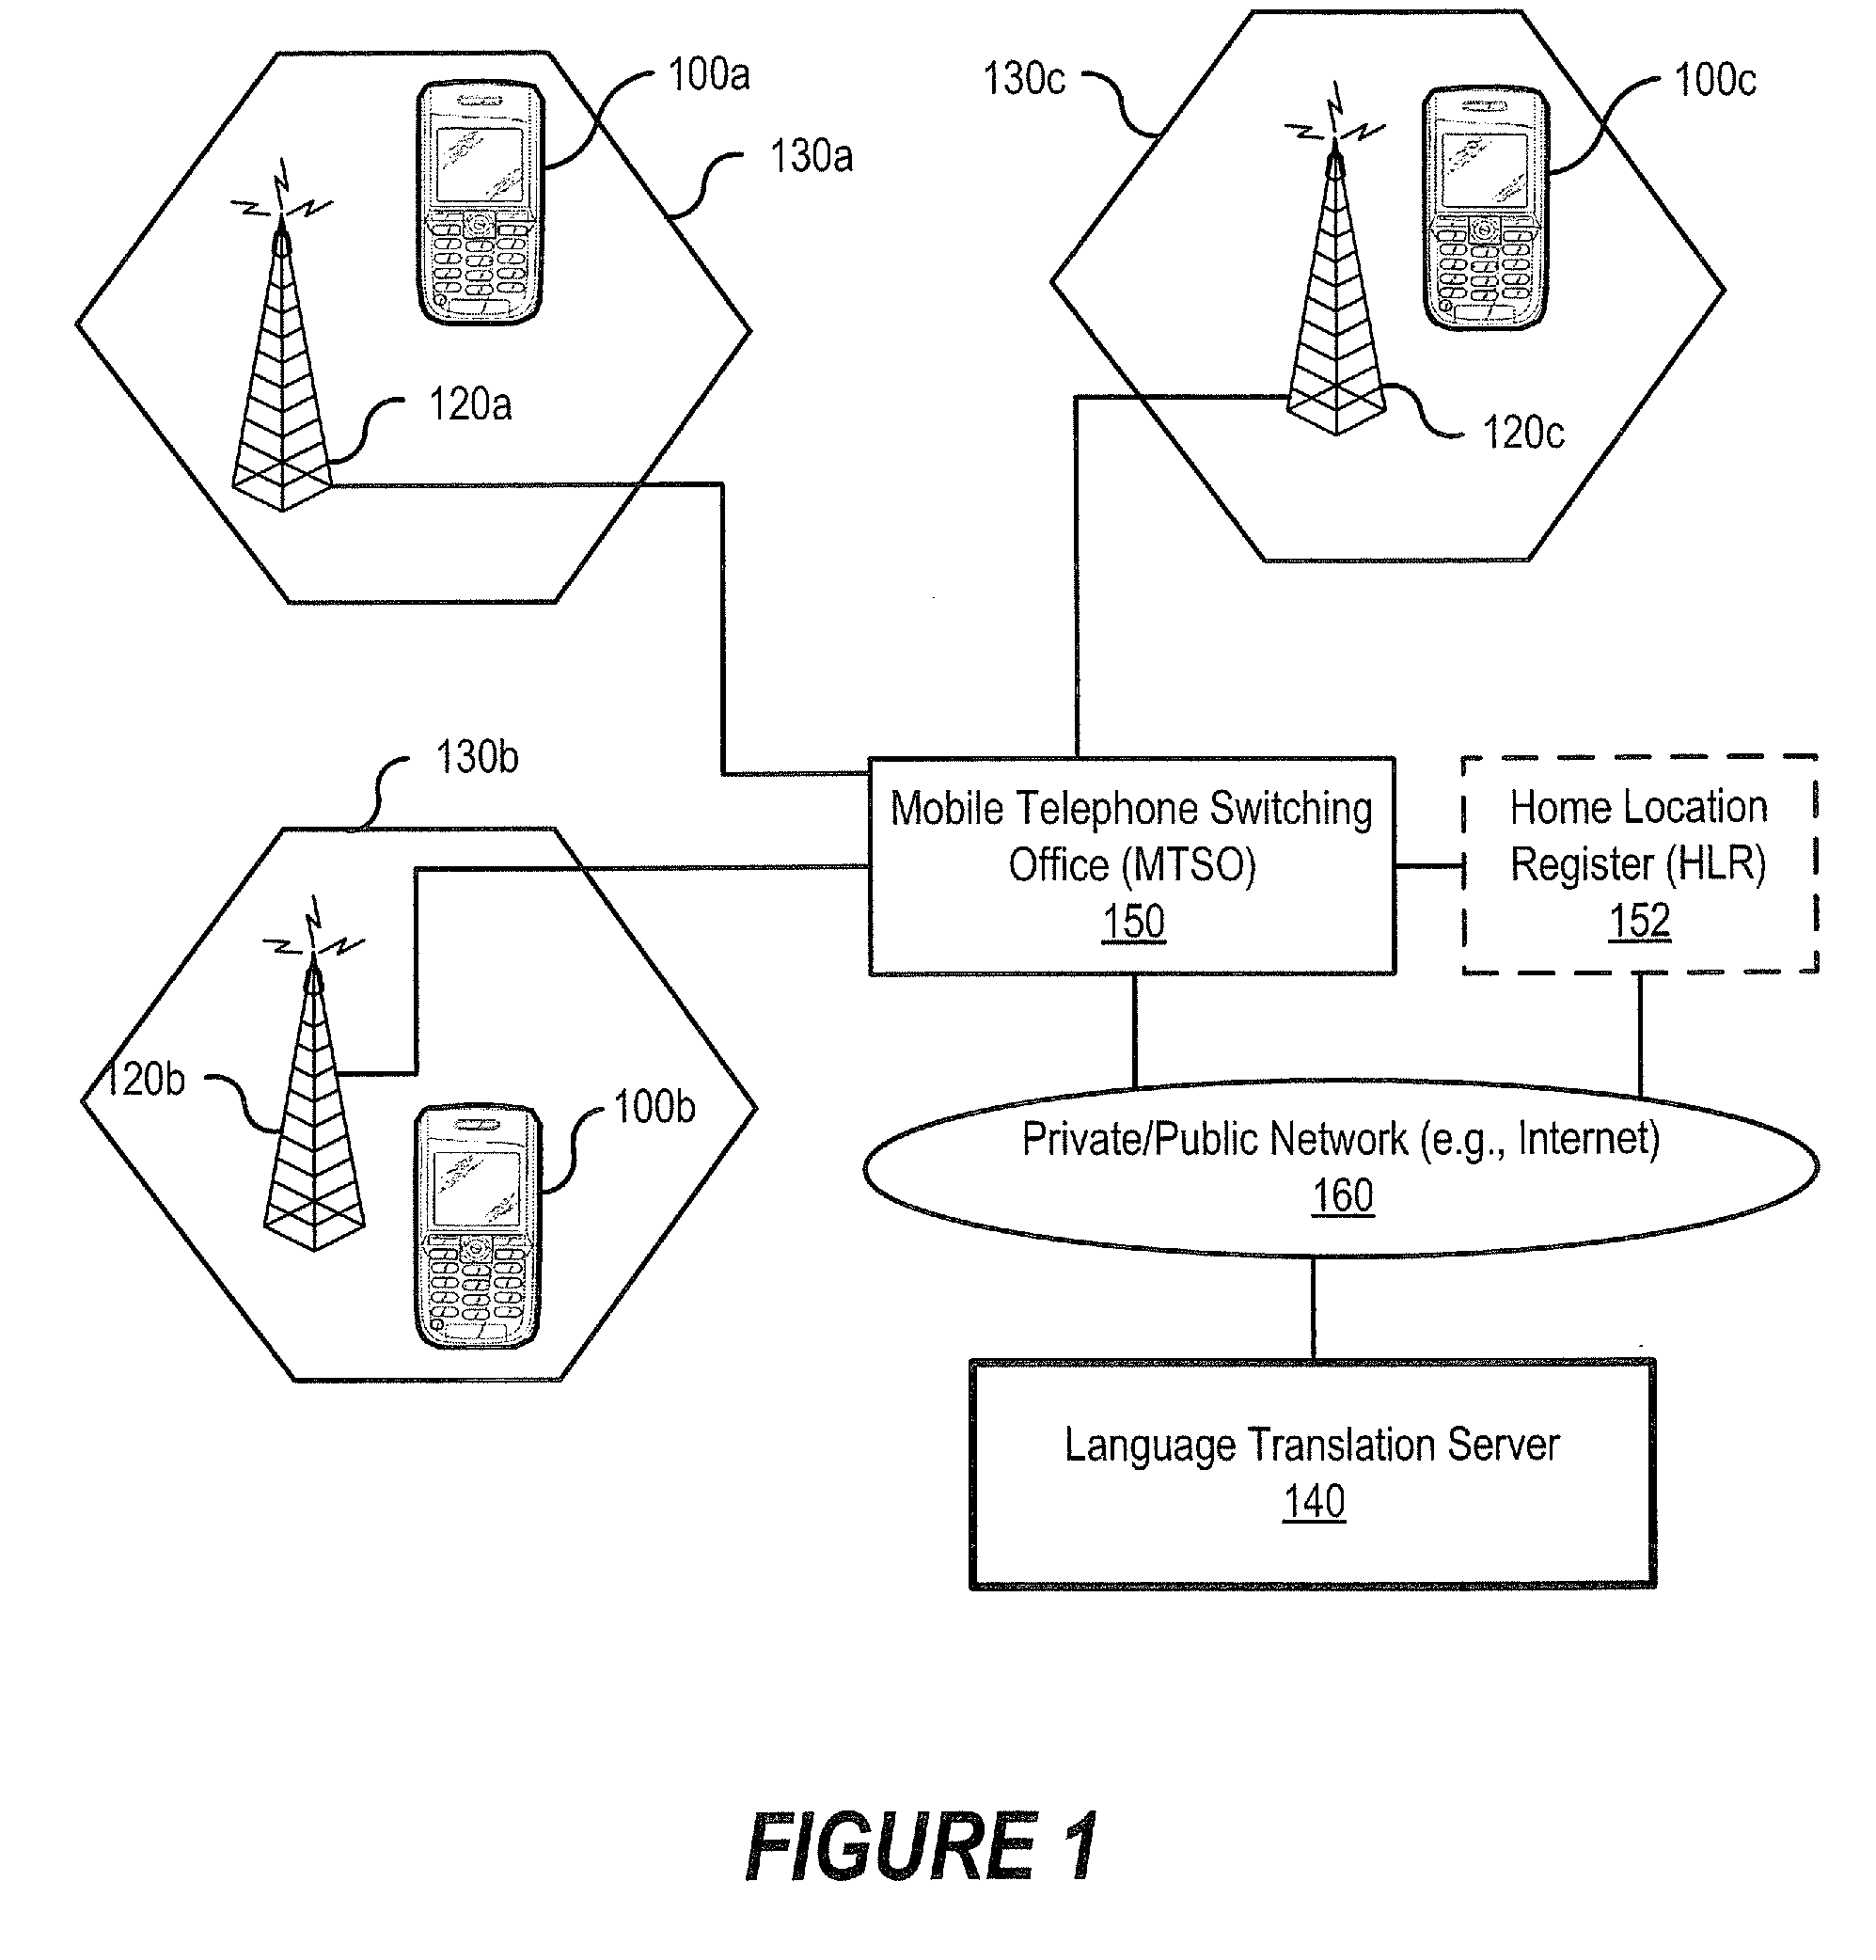 Methods, devices, and computer program products for providing real-time language translation capabilities between communication terminals